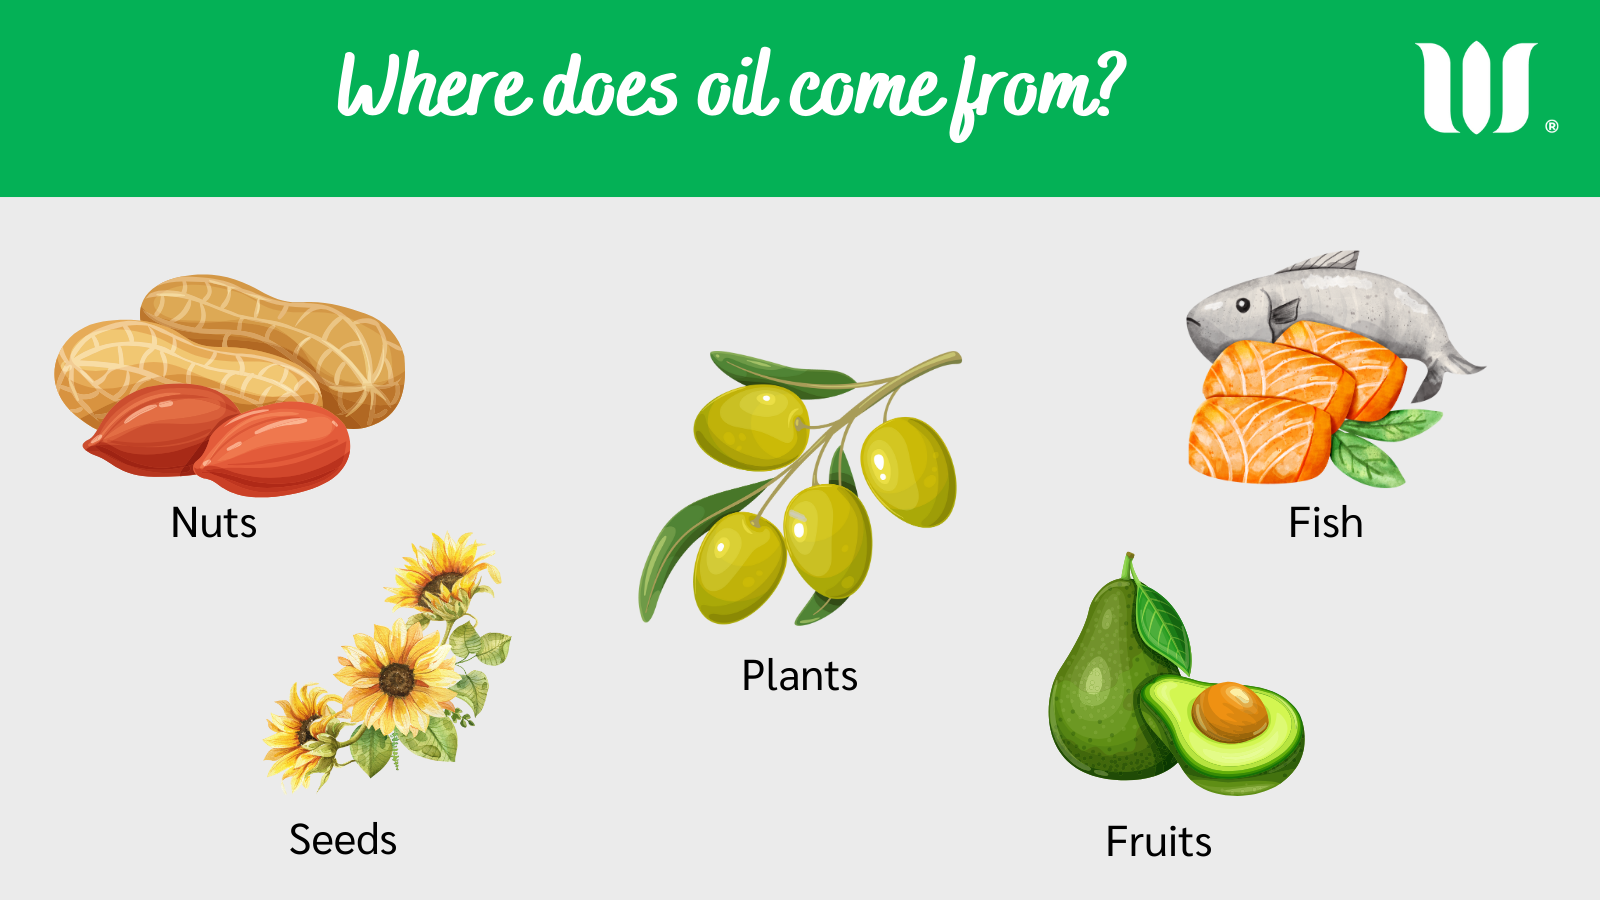 Where oils come from